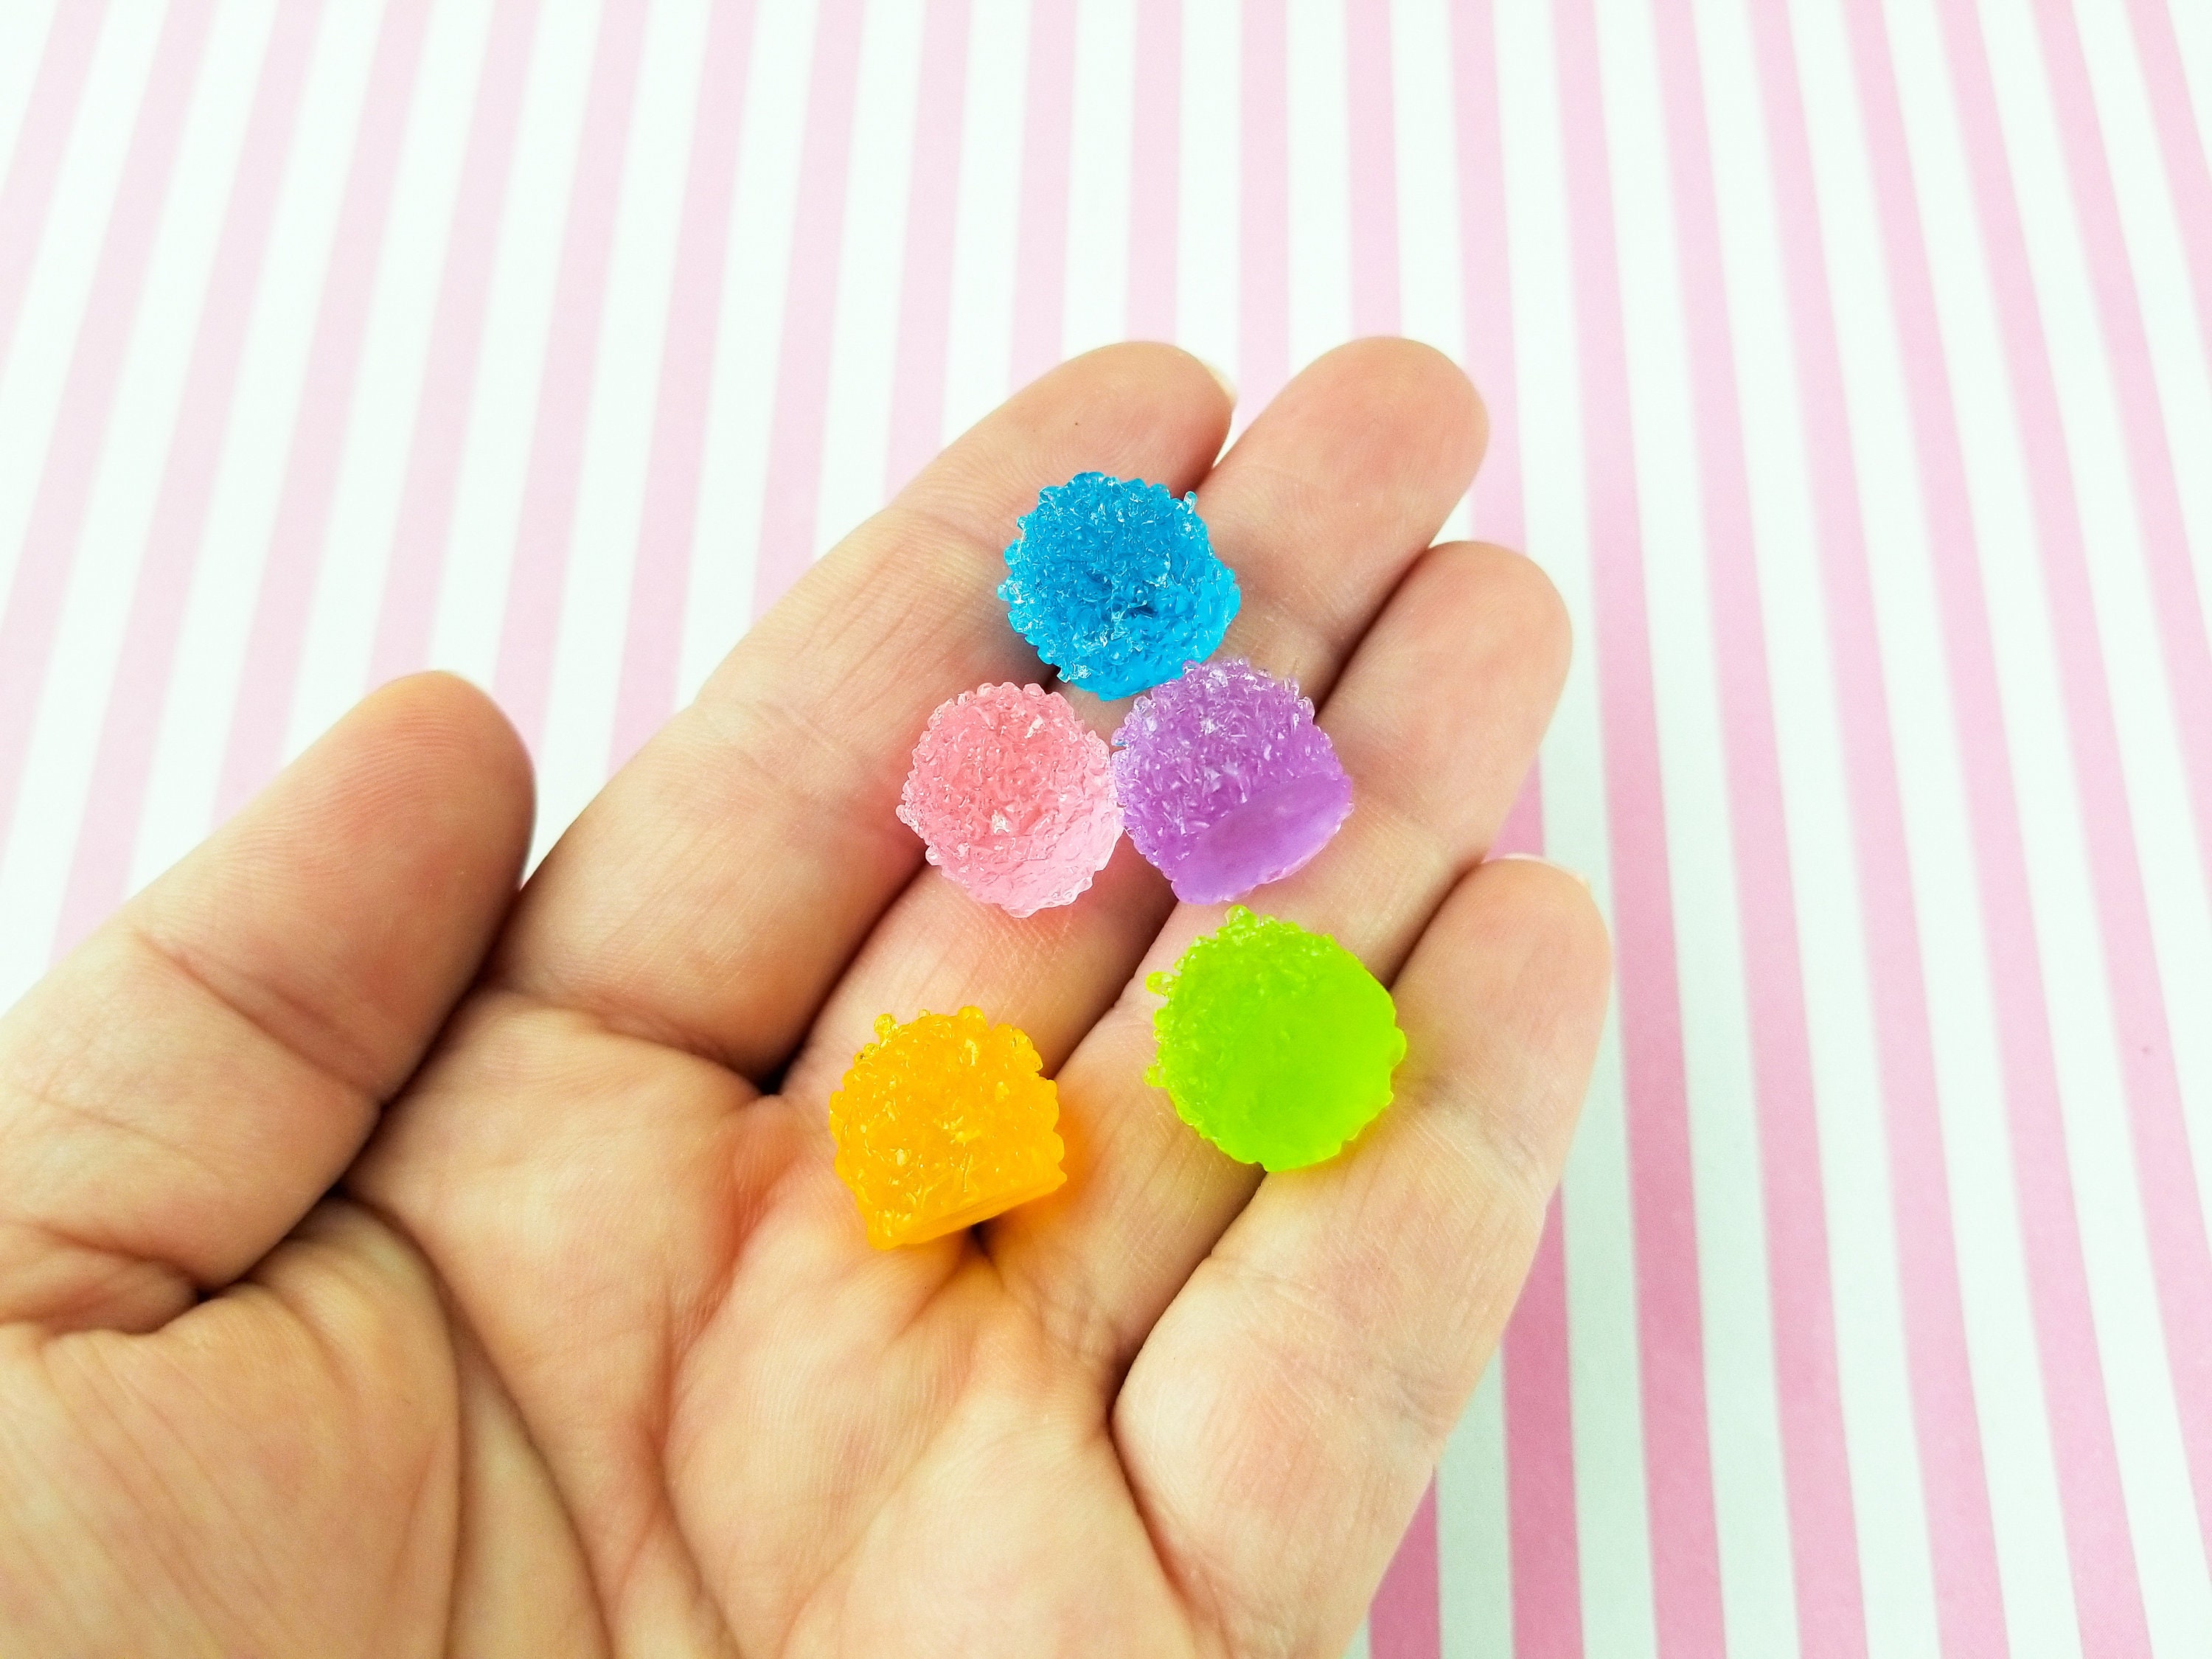 Plastic Earring Post with Rubber Backs & 5mm Cup / Cone Earring Blank, MiniatureSweet, Kawaii Resin Crafts, Decoden Cabochons Supplies